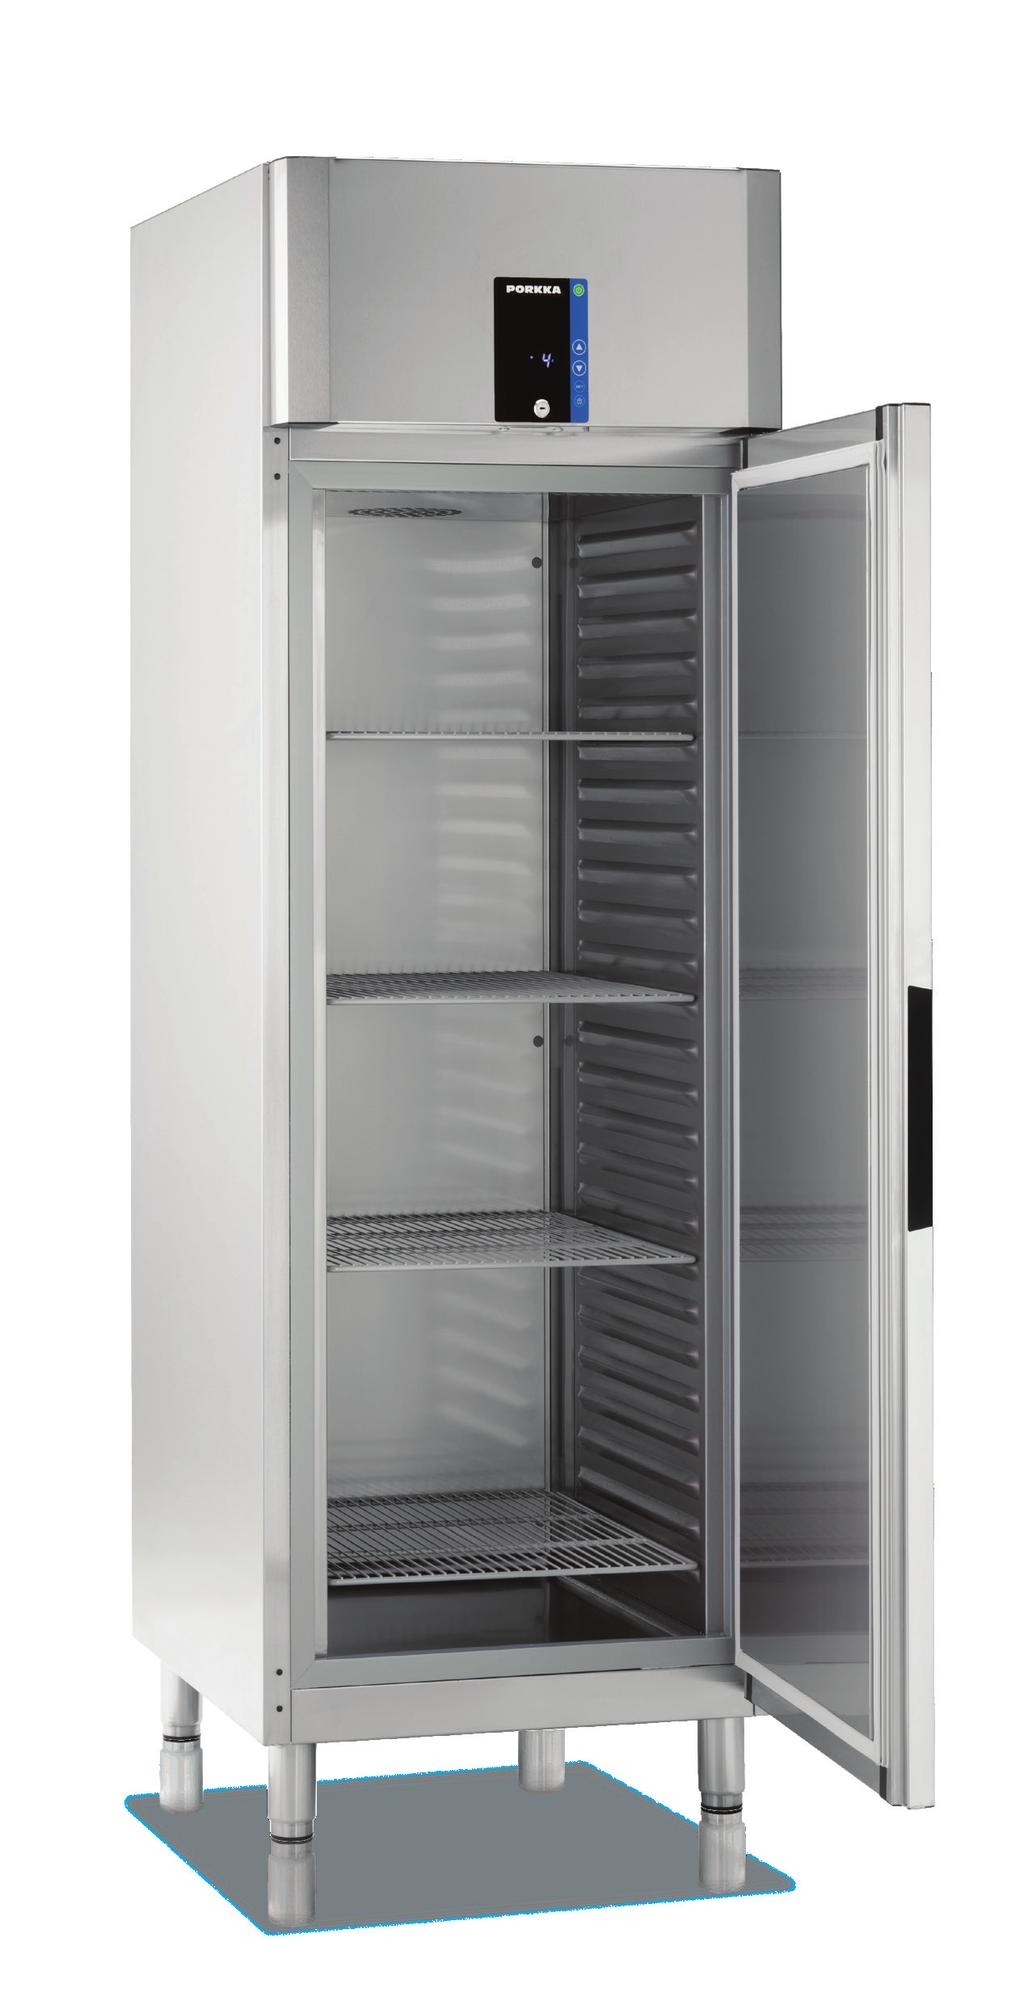 Inventus 6 Designed for use in either kitchen or bakery applications the C6, M6 and F6 cabinets give a small footprint for limited space operations, ideal for small kitchens or bakery outlets.